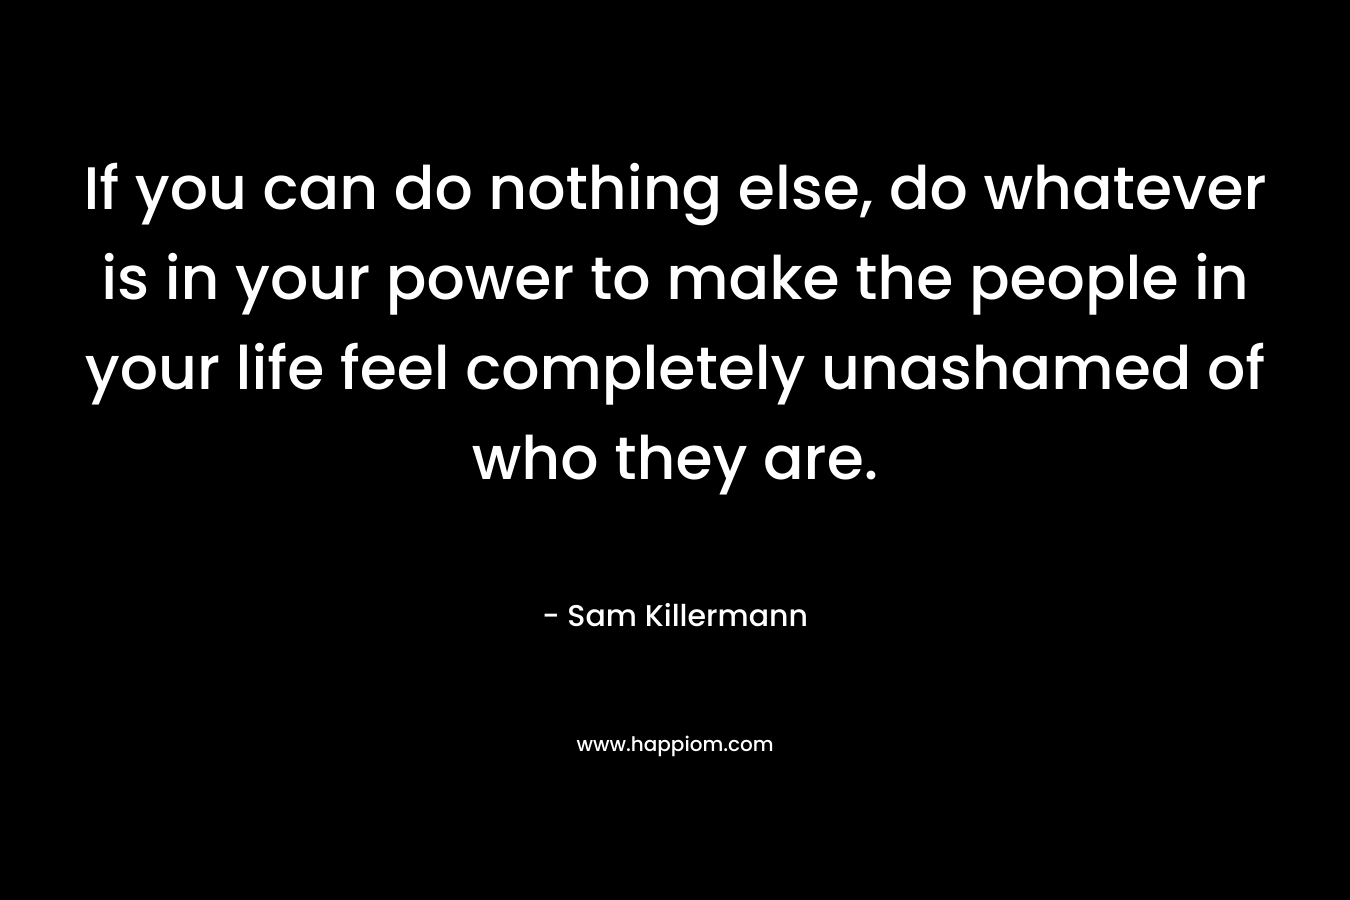 If you can do nothing else, do whatever is in your power to make the people in your life feel completely unashamed of who they are.